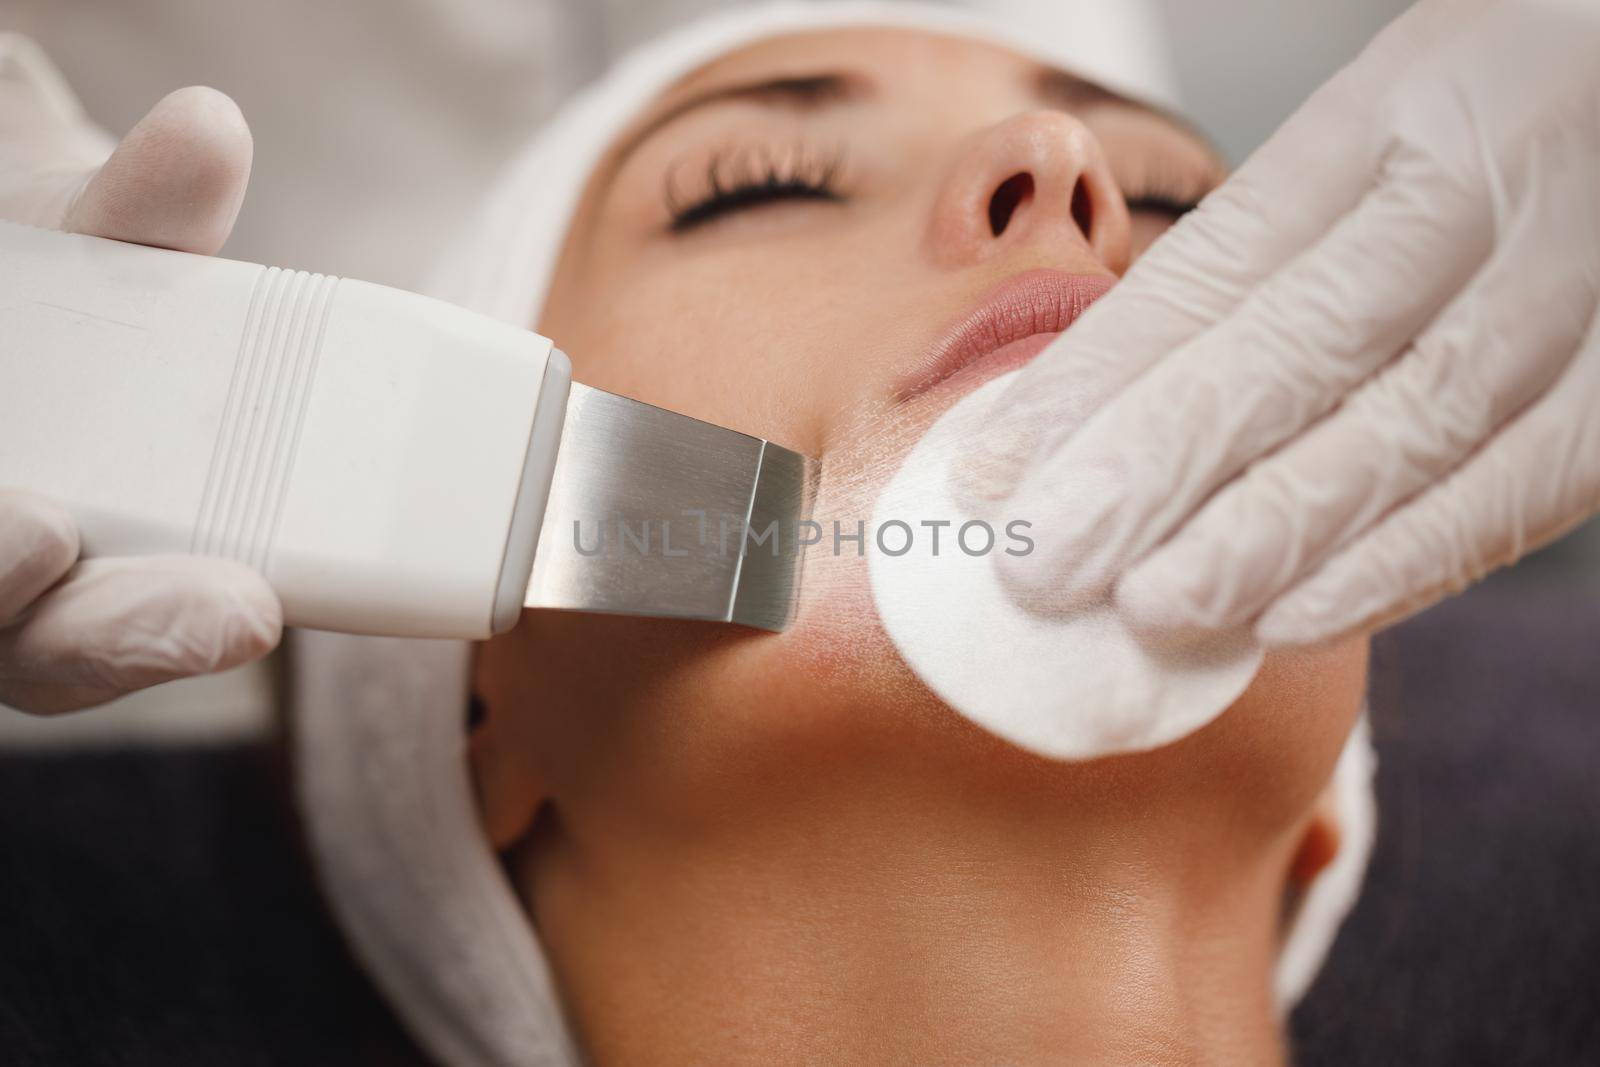 Ultrasonic Facial Cleansing In A Beauty Salon by MilanMarkovic78